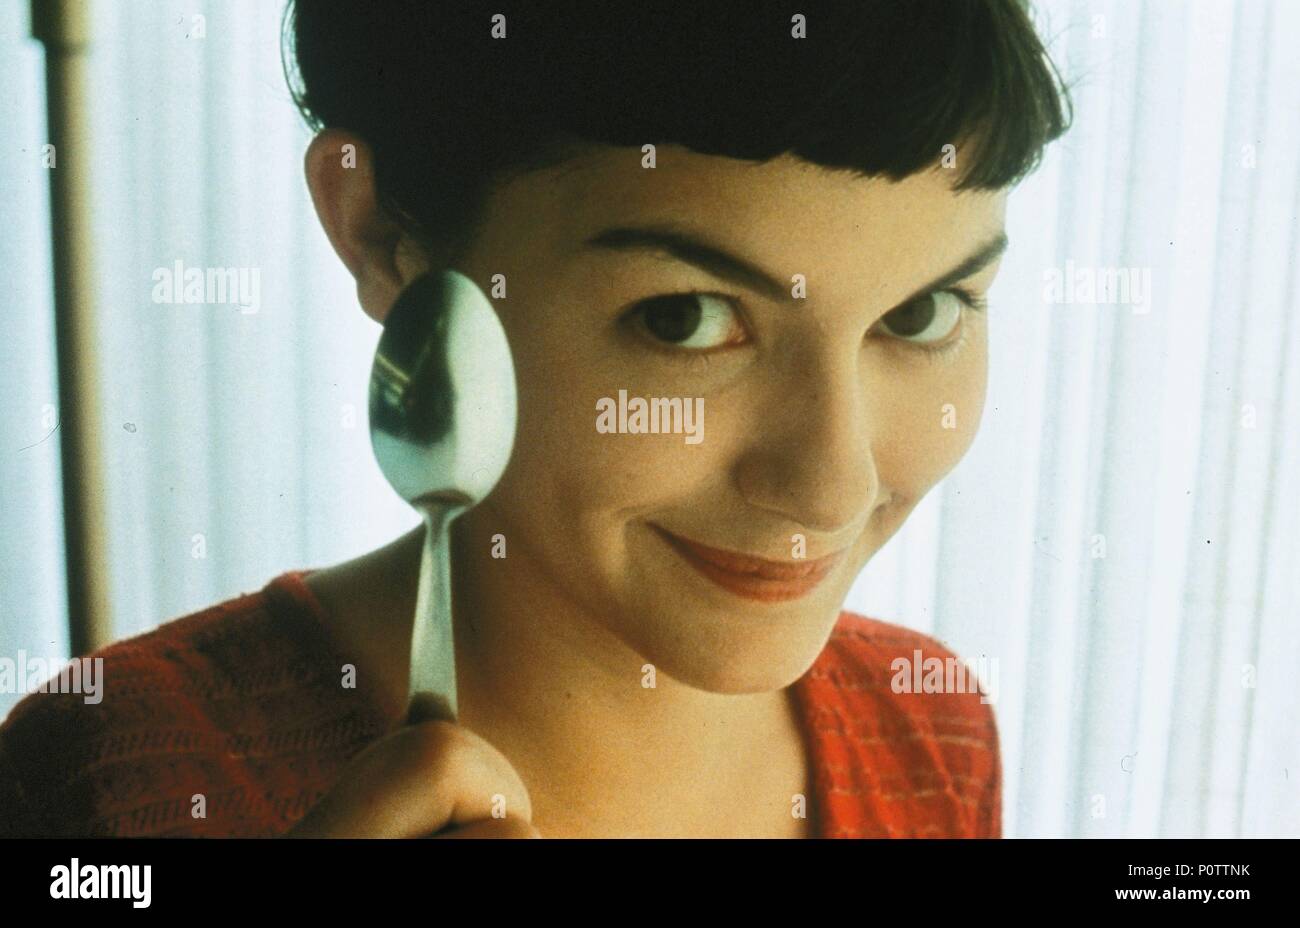 Original Film Title: LE FABULEUX DESTIN D'AMÉLIE POULAIN.  English Title: AMÉLIE.  Film Director: JEAN-PIERRE JEUNET.  Year: 2001.  Stars: AUDREY TAUTOU. Copyright: Editorial inside use only. This is a publicly distributed handout. Access rights only, no license of copyright provided. Mandatory authorization to Visual Icon (www.visual-icon.com) is required for the reproduction of this image. Credit: VICTORIE PRODUCTIONS/UGC IMAGES/TAPIOCA FILMS/FRANCE 3 CINEM / Album Stock Photo